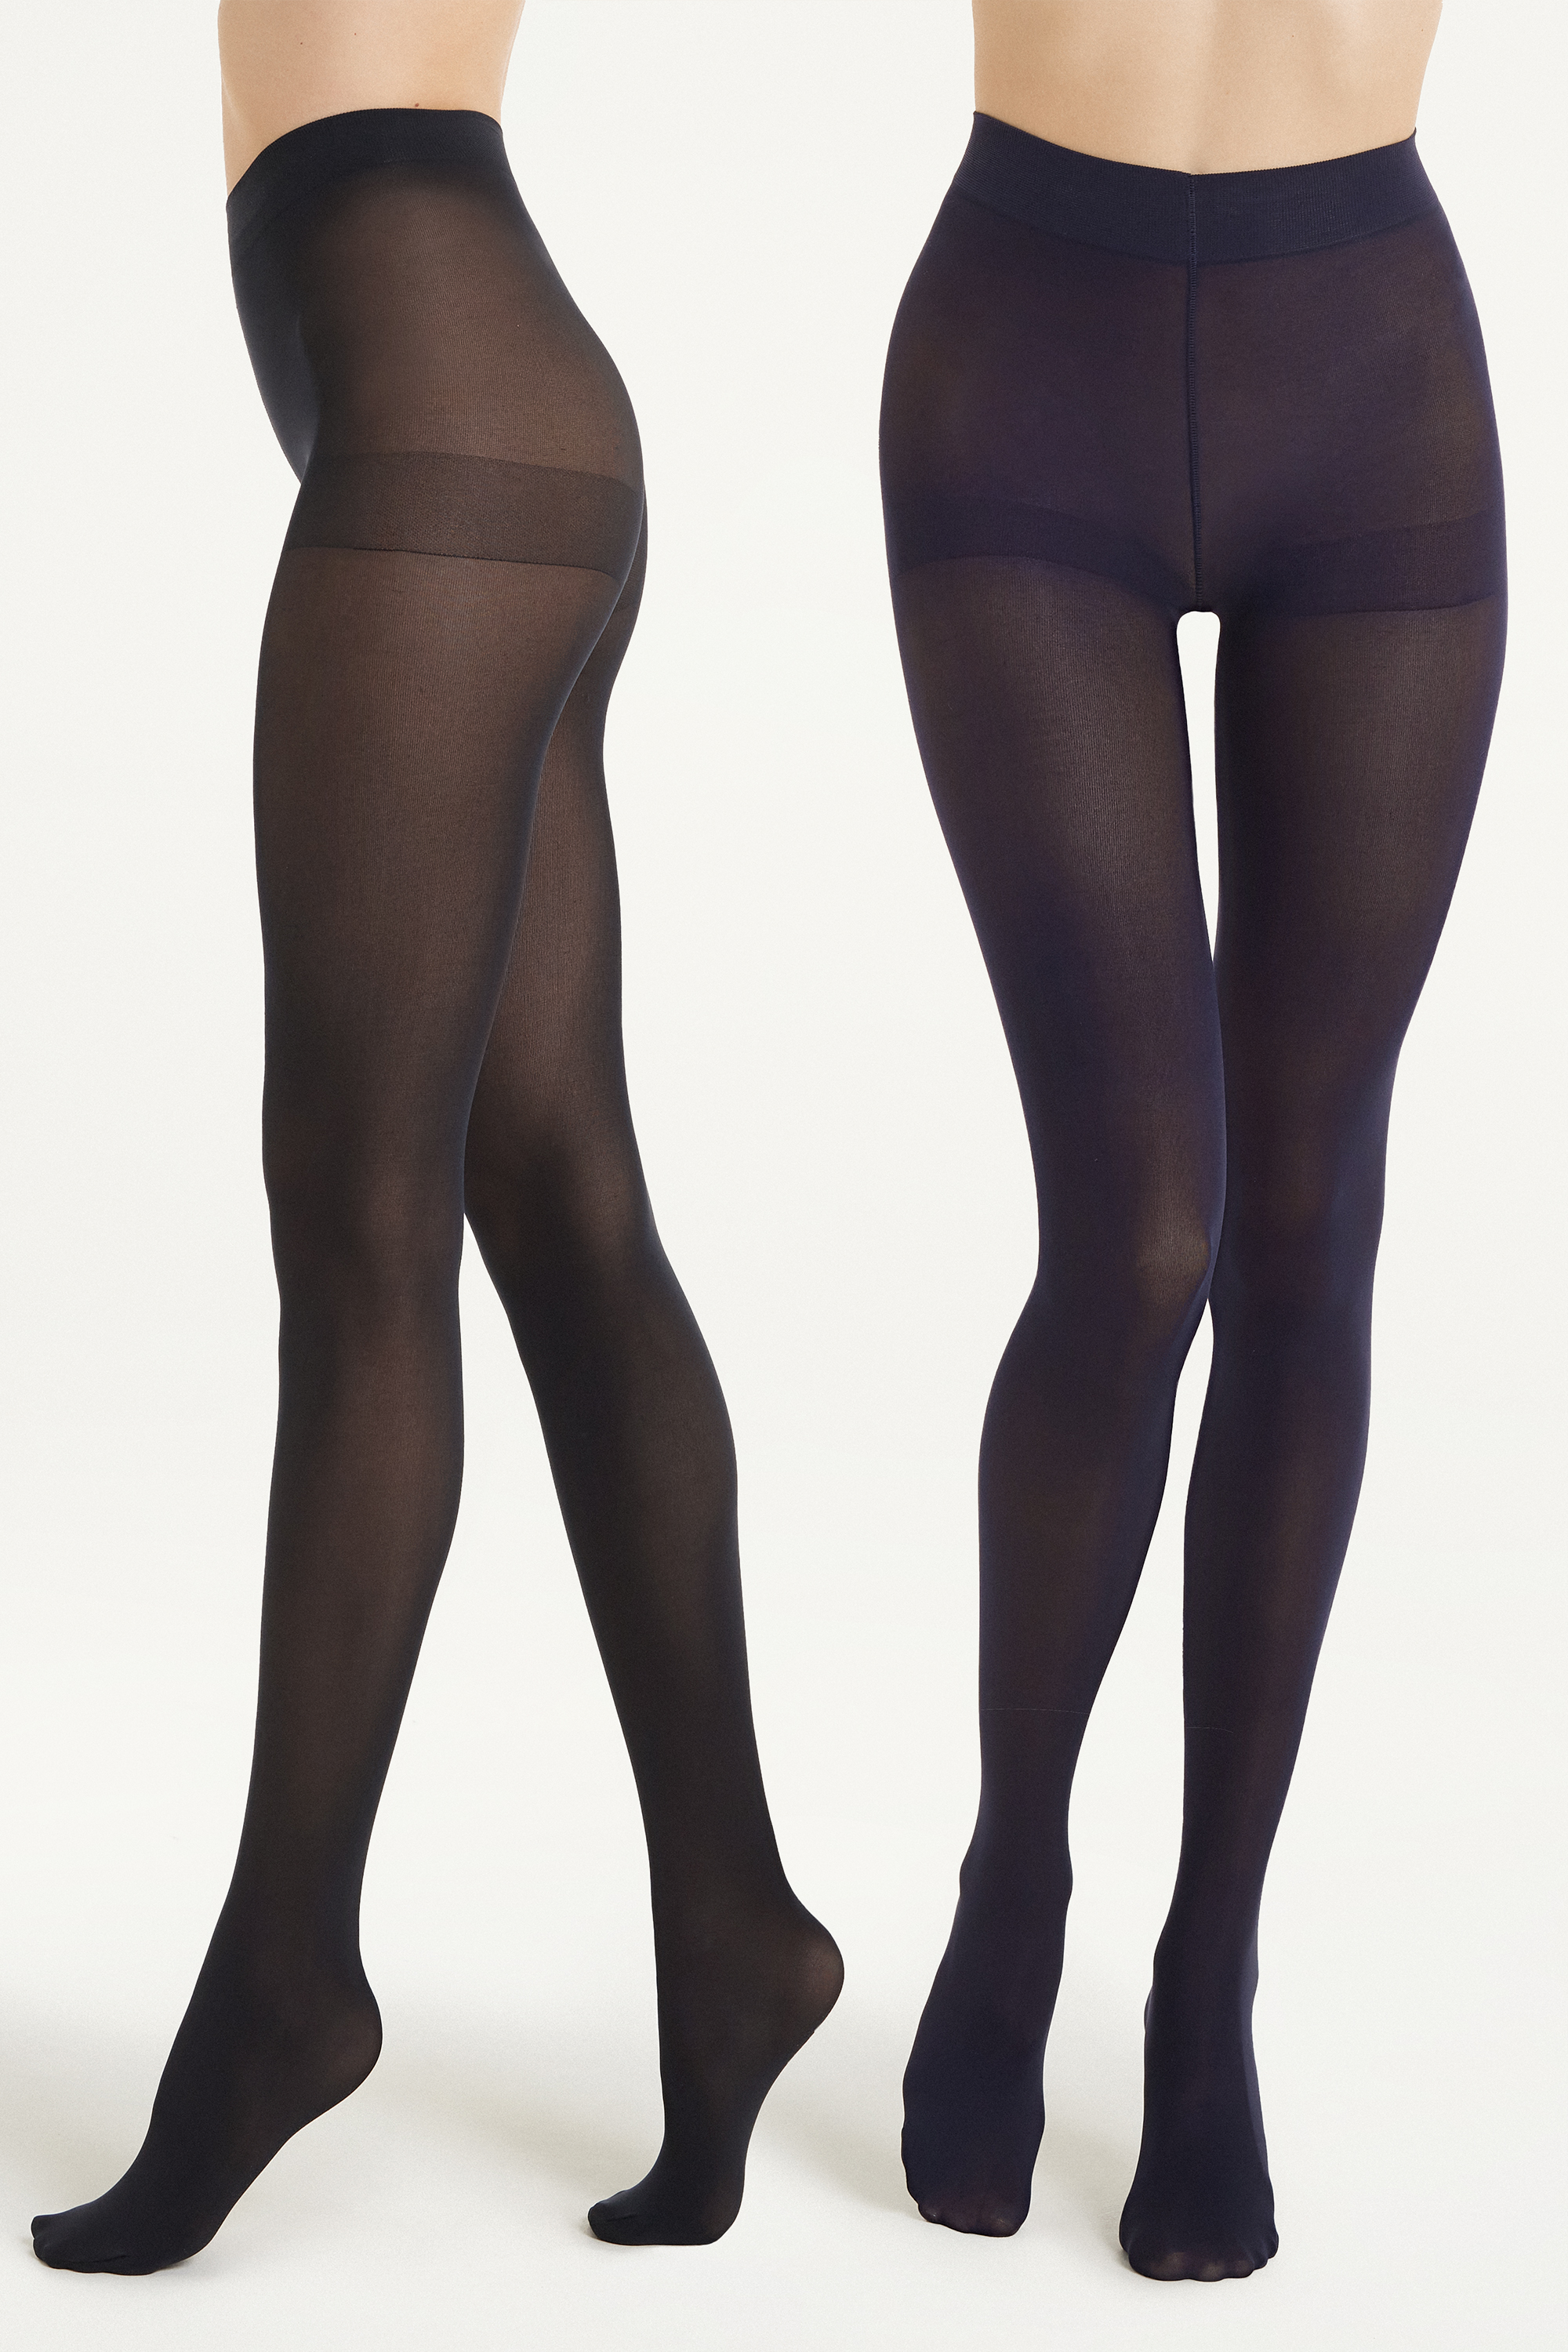 2 Pairs of 50 Denier Opaque Microfiber Tights